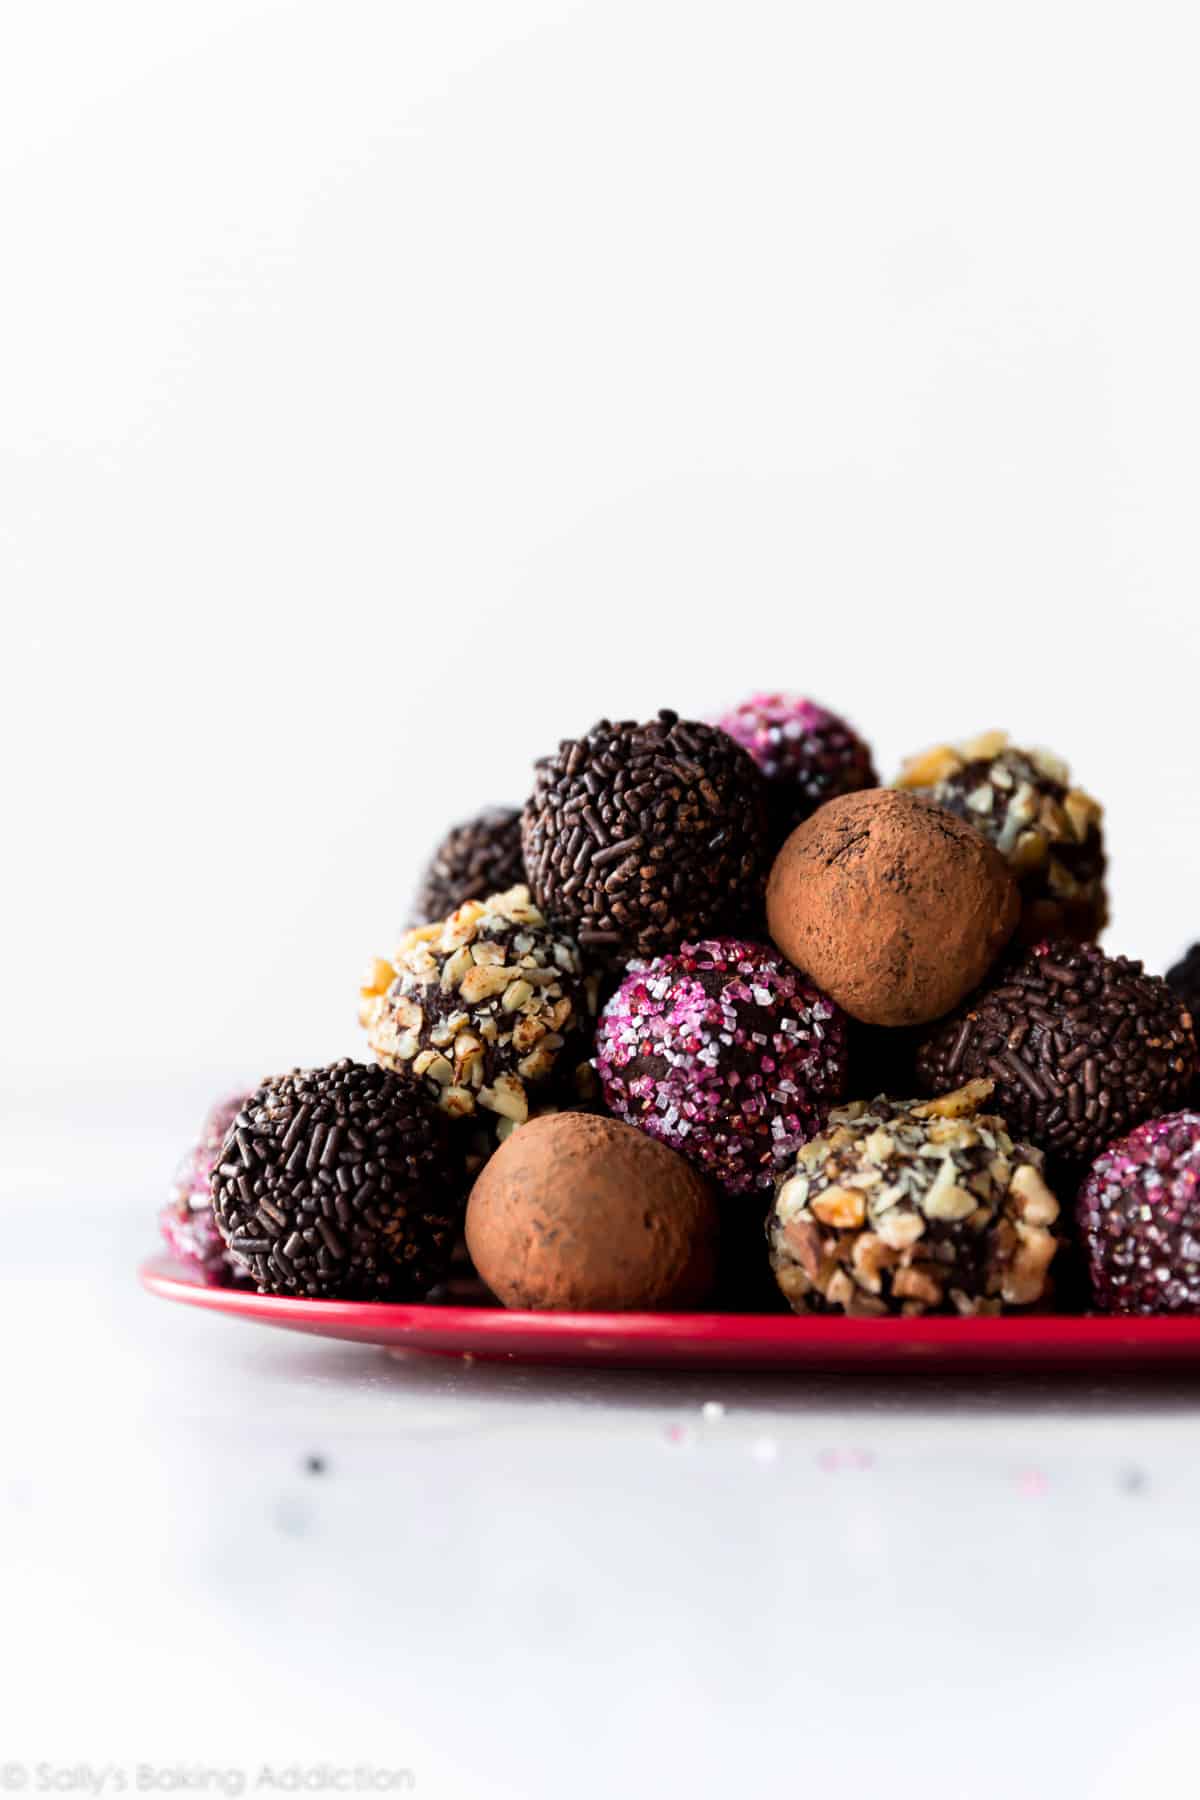 stack of chocolate truffles rolled into cocoa powder and sprinkles on a red plate